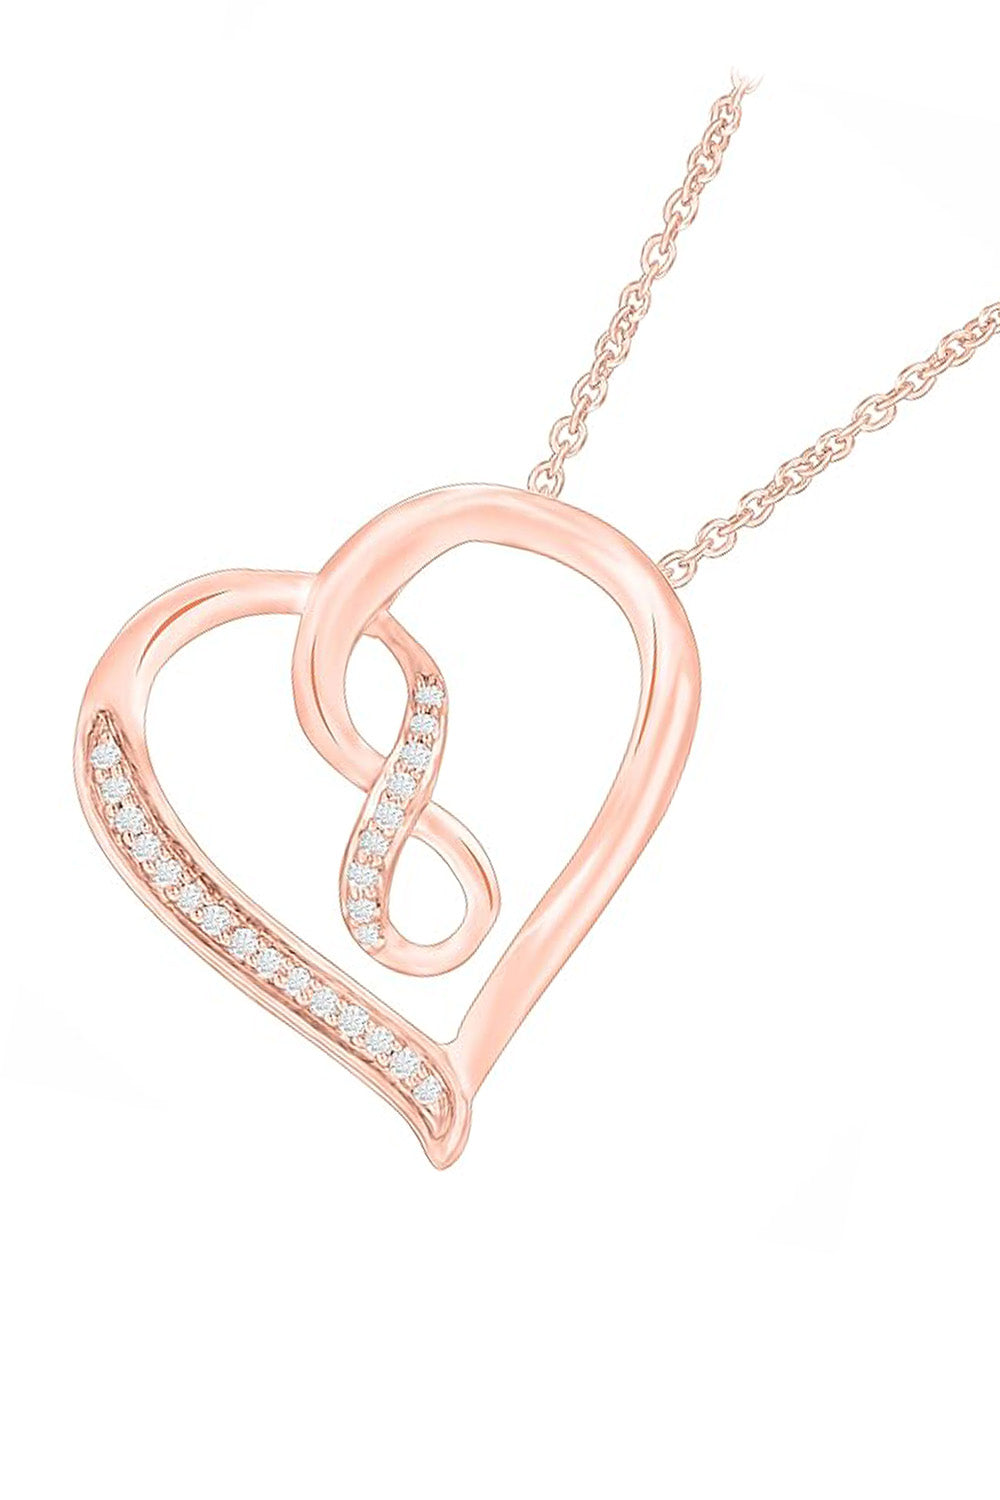 Rose Gold Color Infinity Heart Necklace